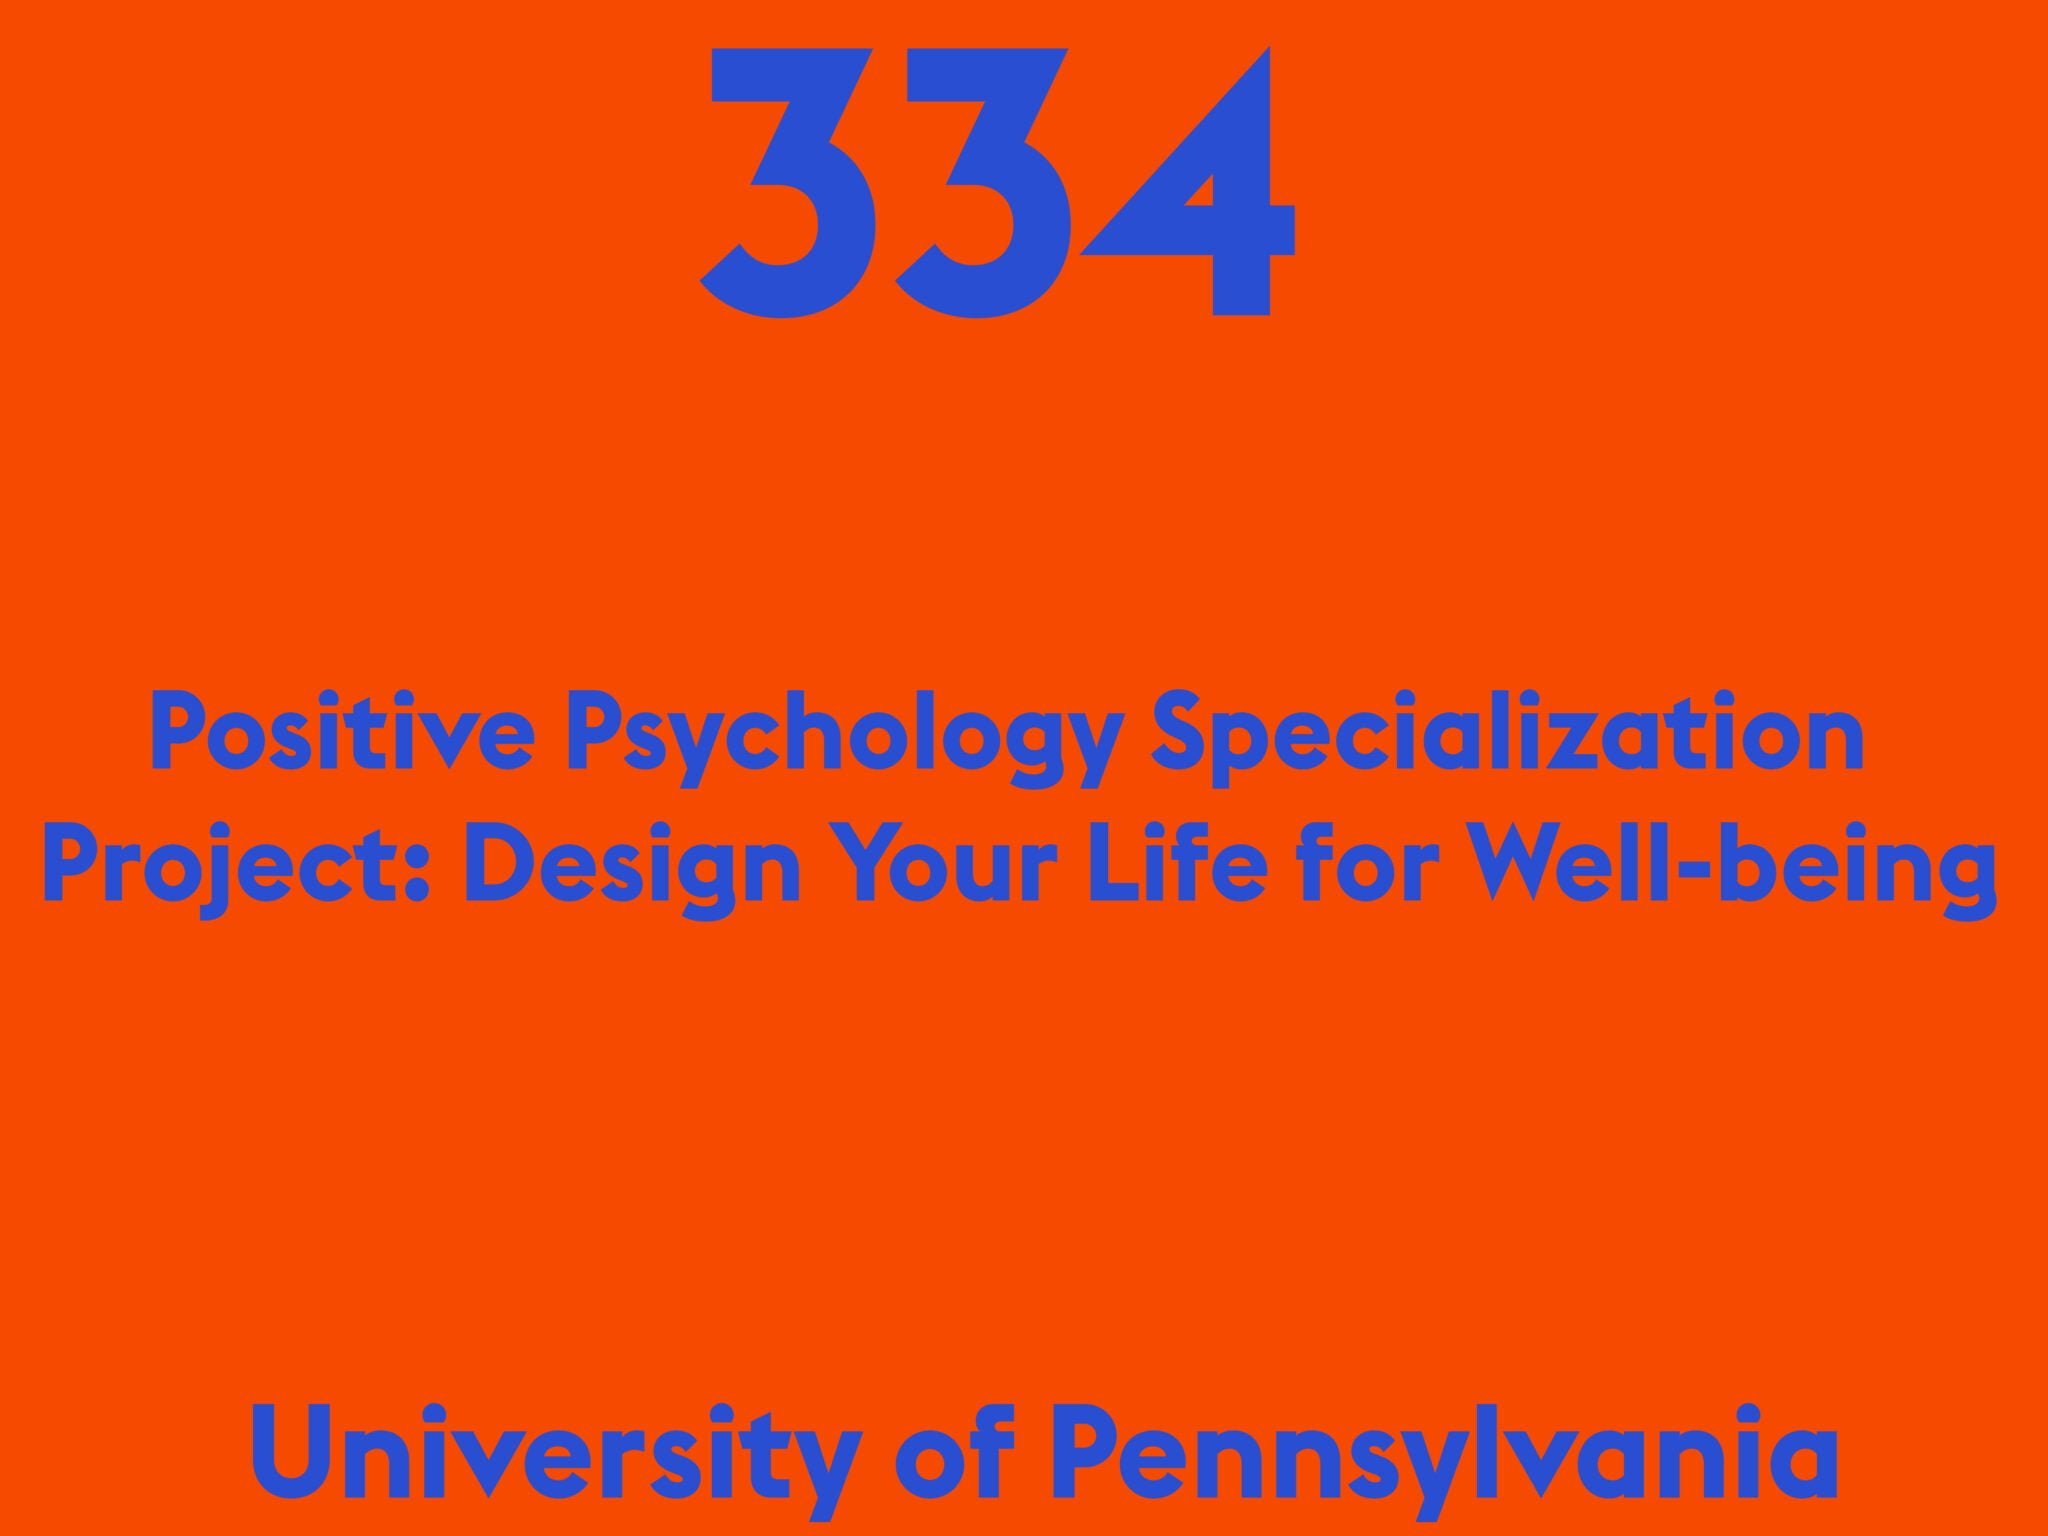 Positive Psychology Specialization Project: Design Your Life for Well-being